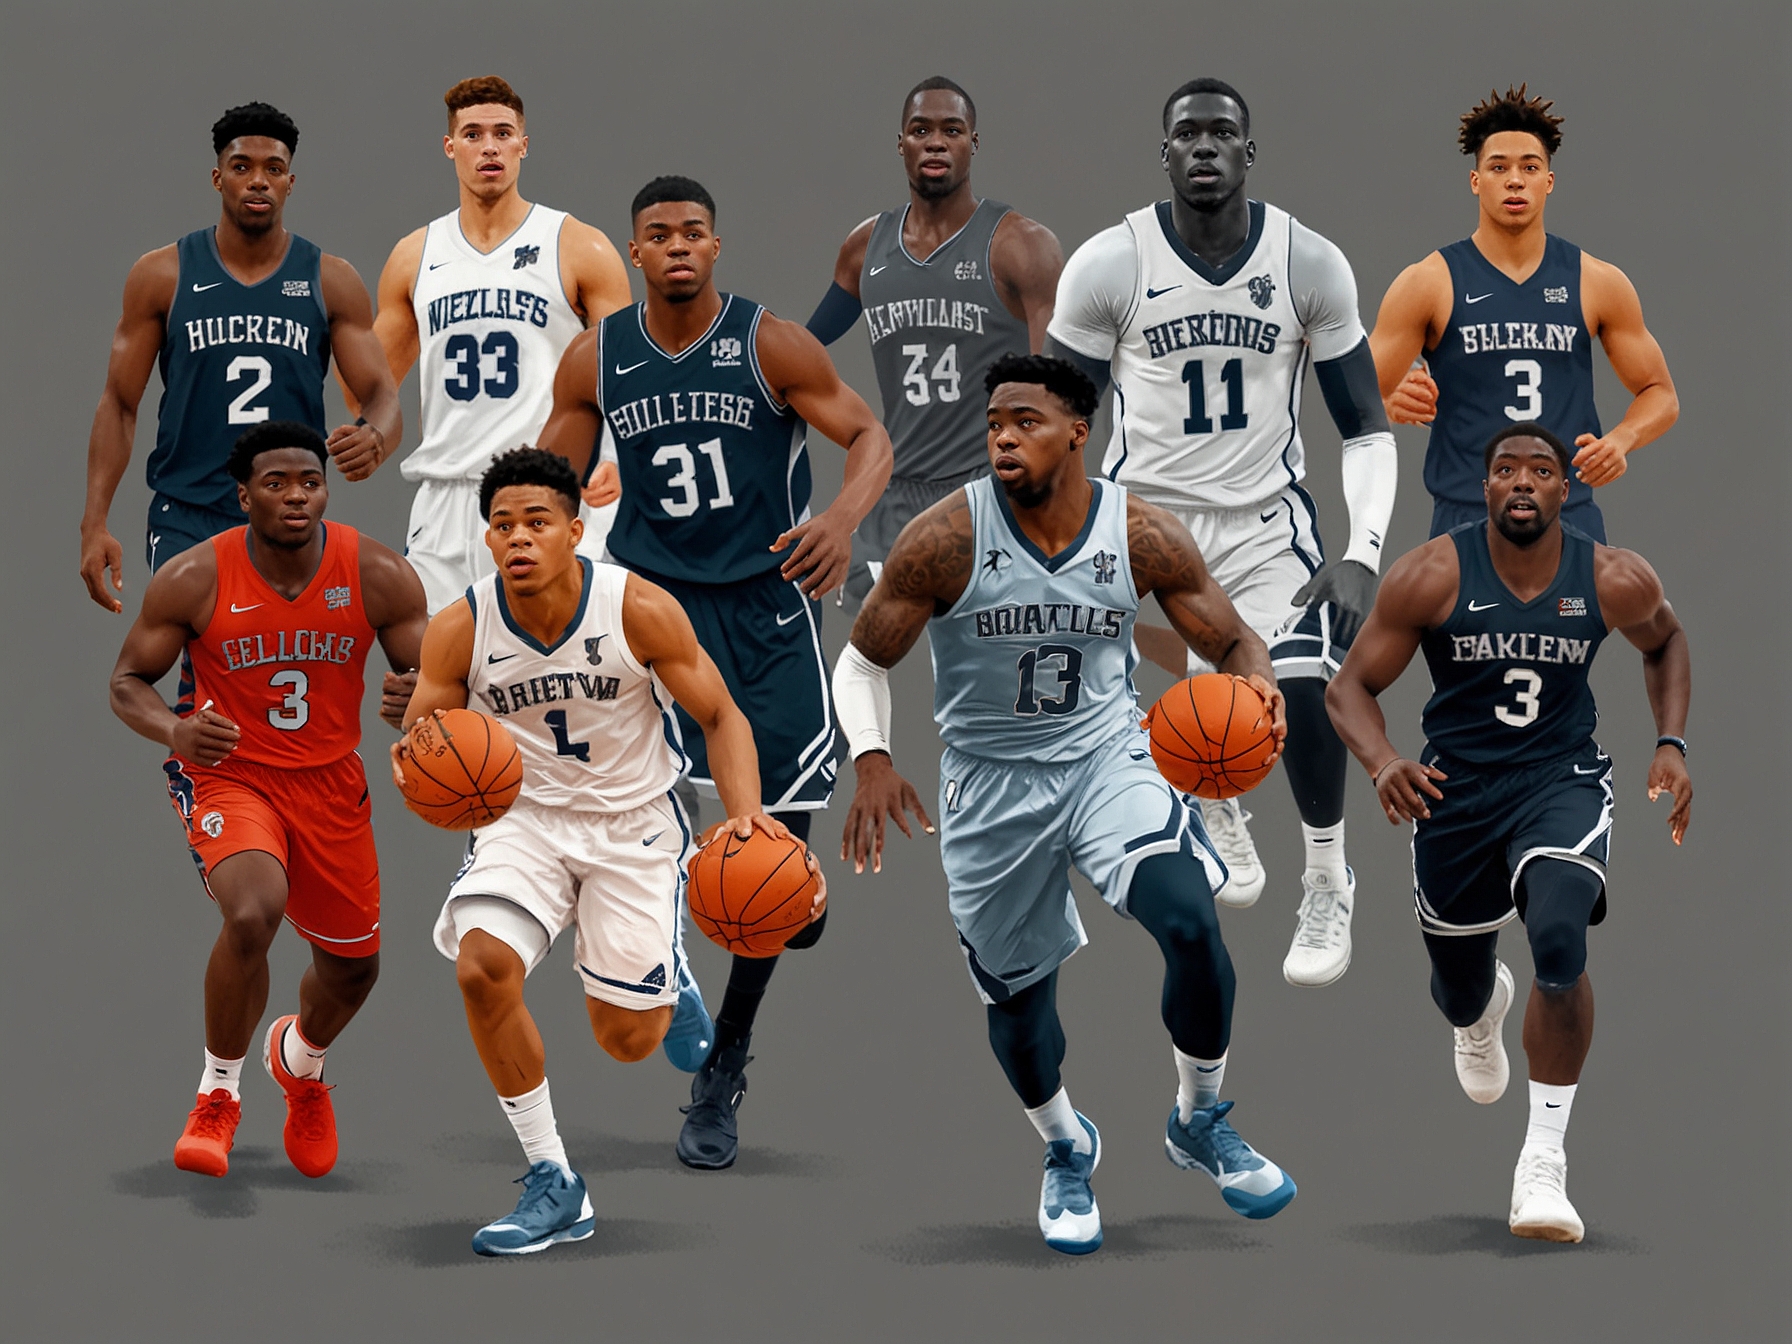 Athletes from different sports representing the Big East Conference, showcasing the diverse sports coverage, including basketball, soccer, and volleyball, under the new media rights agreement.